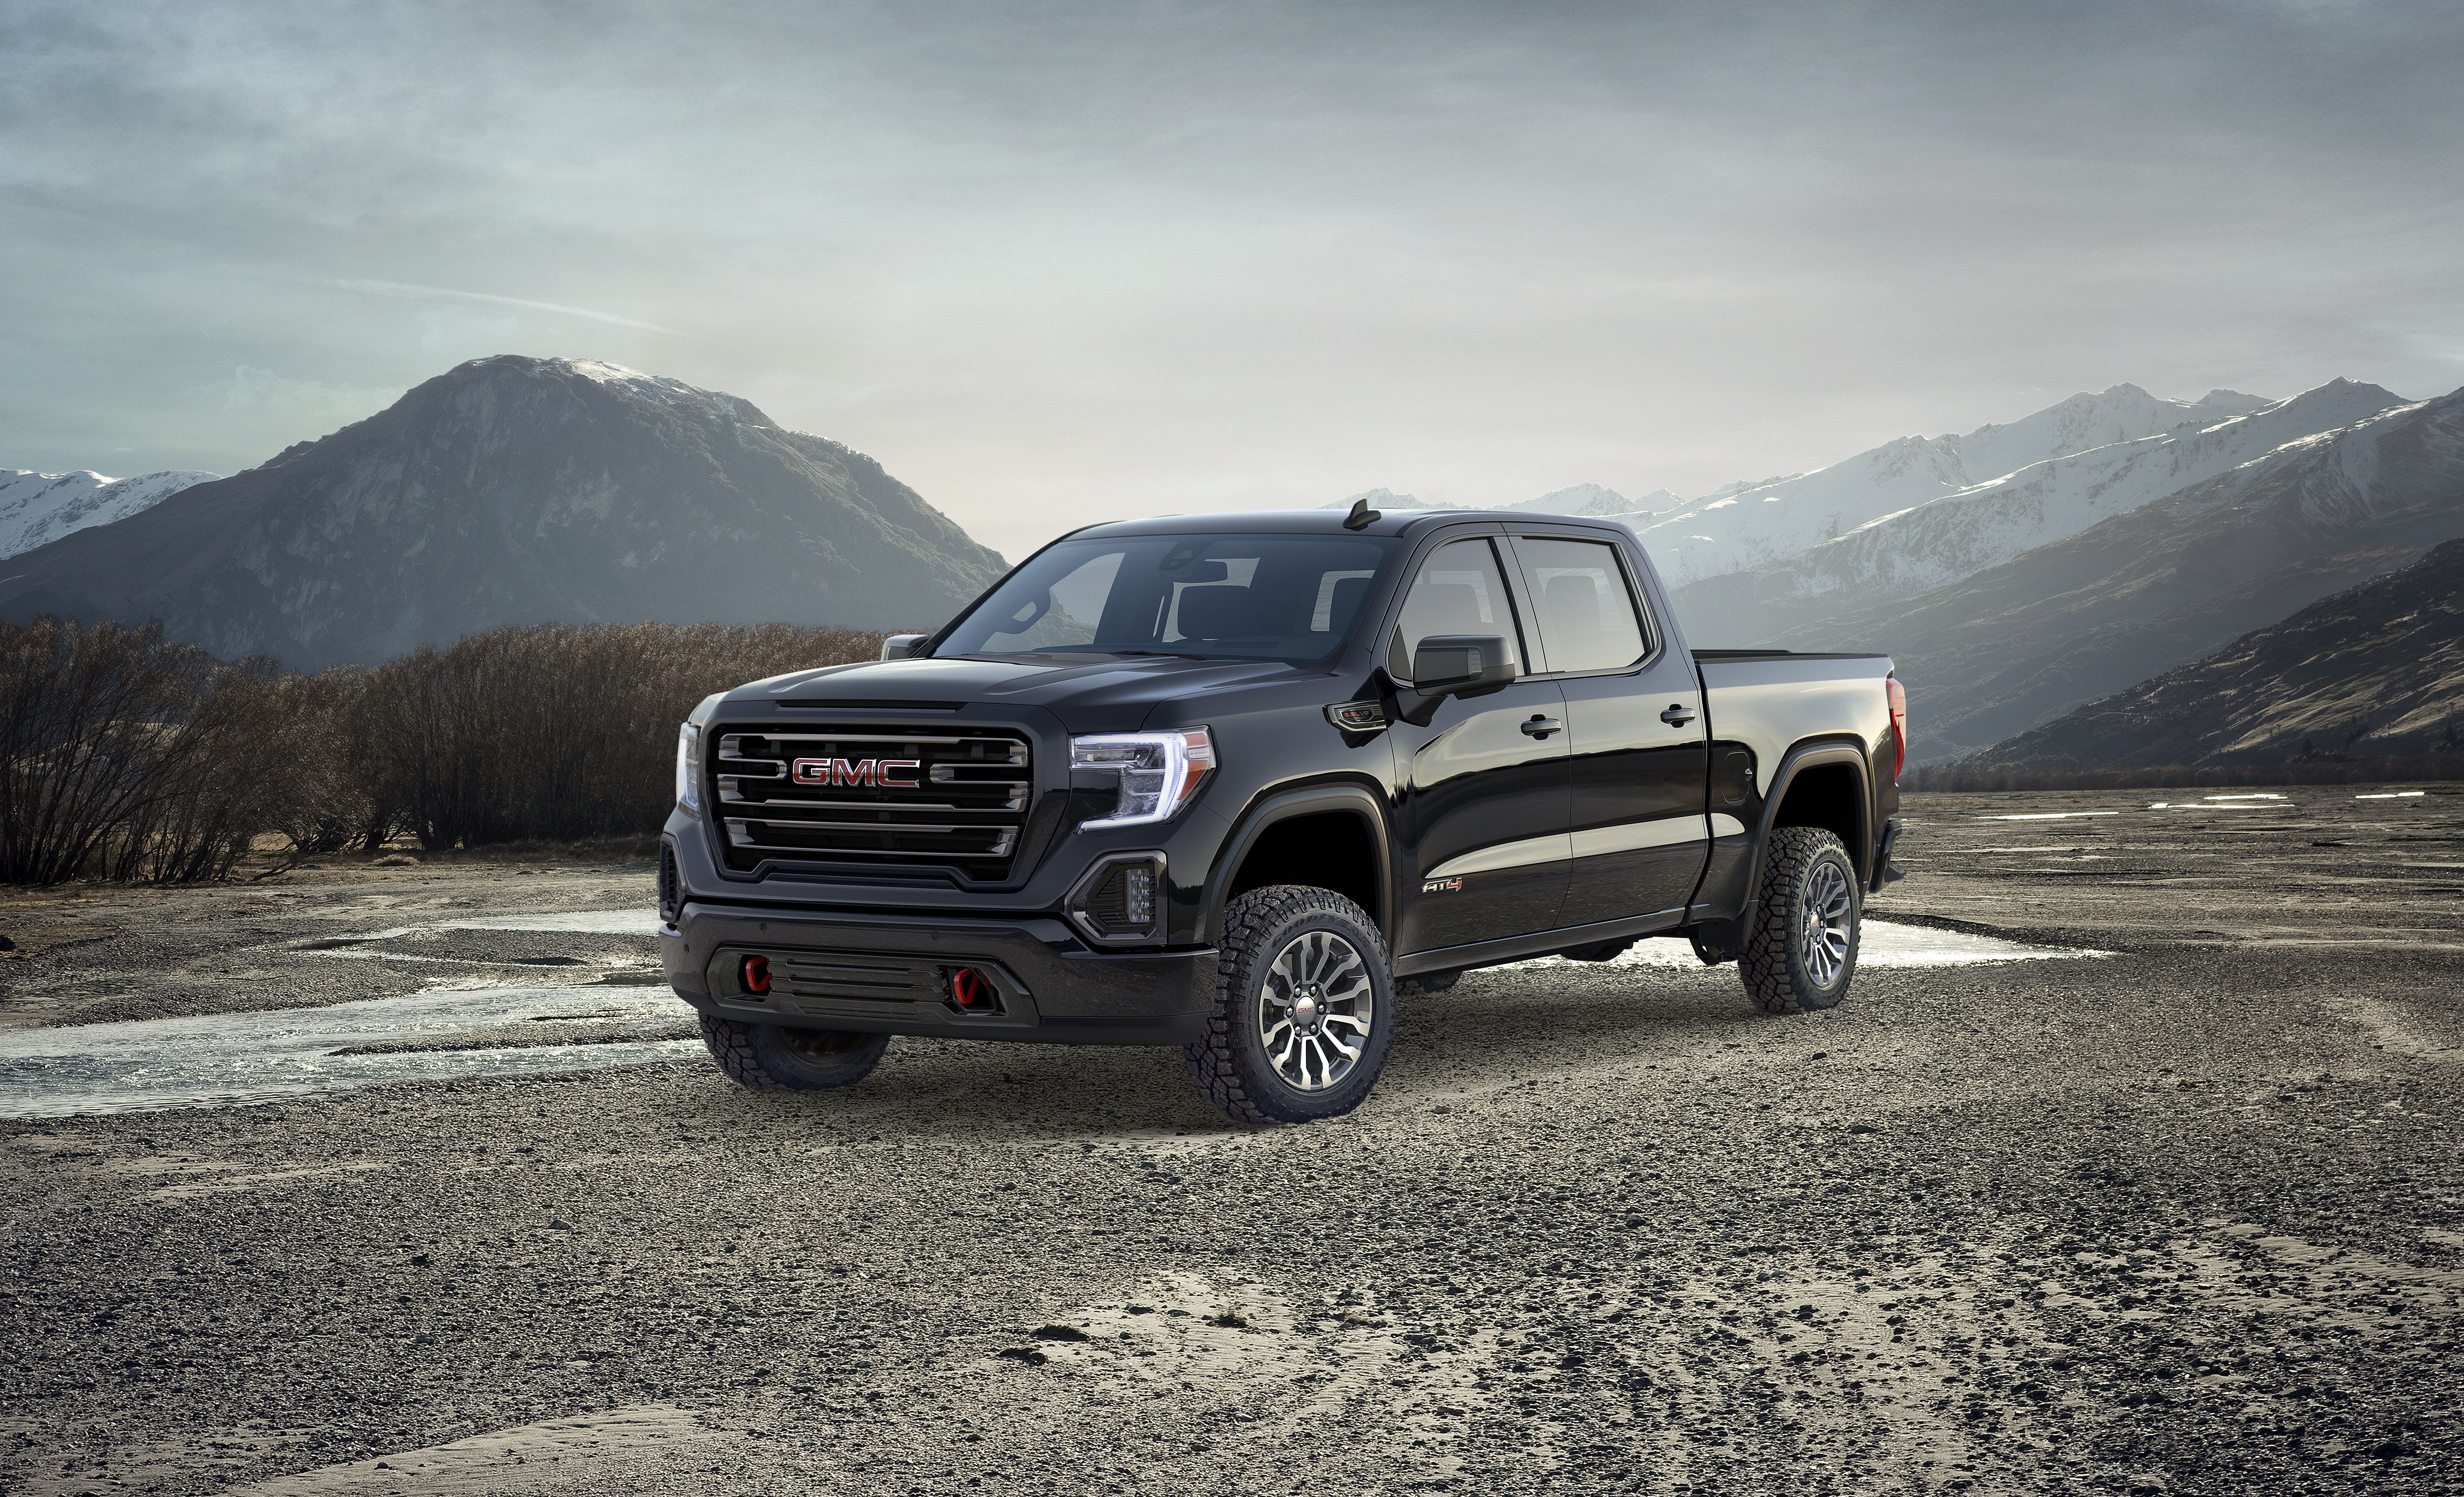 Wallpaper Of The Day: 2019 GMC Sierra AT4